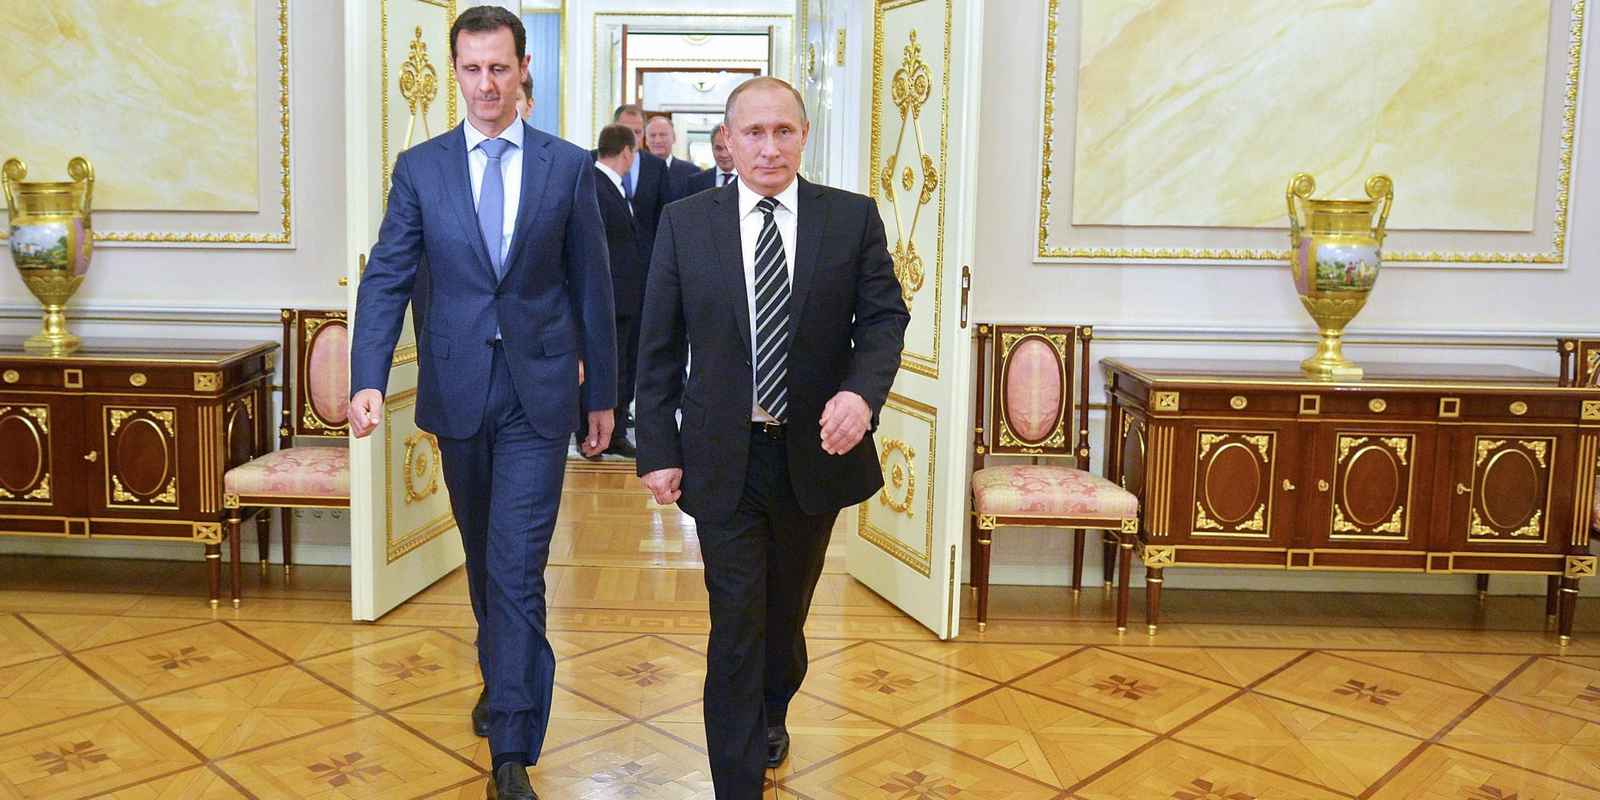 Russian President Vladimir Putin (R) greets his Syrian counterpart Bashar al-Assad upon his arrival for a meeting at the Kremlin in Moscow on October 21, 2015. Assad, on his first foreign visit since Syria's war broke out, told his main backer and counterpart Putin in Moscow that Russia's campaign in Syria has helped contain "terrorism". AFP PHOTO / RIA NOVOSTI / KREMLIN POOL / ALEXEY DRUZHININ        (Photo credit should read ALEXEY DRUZHININ/AFP/Getty Images)